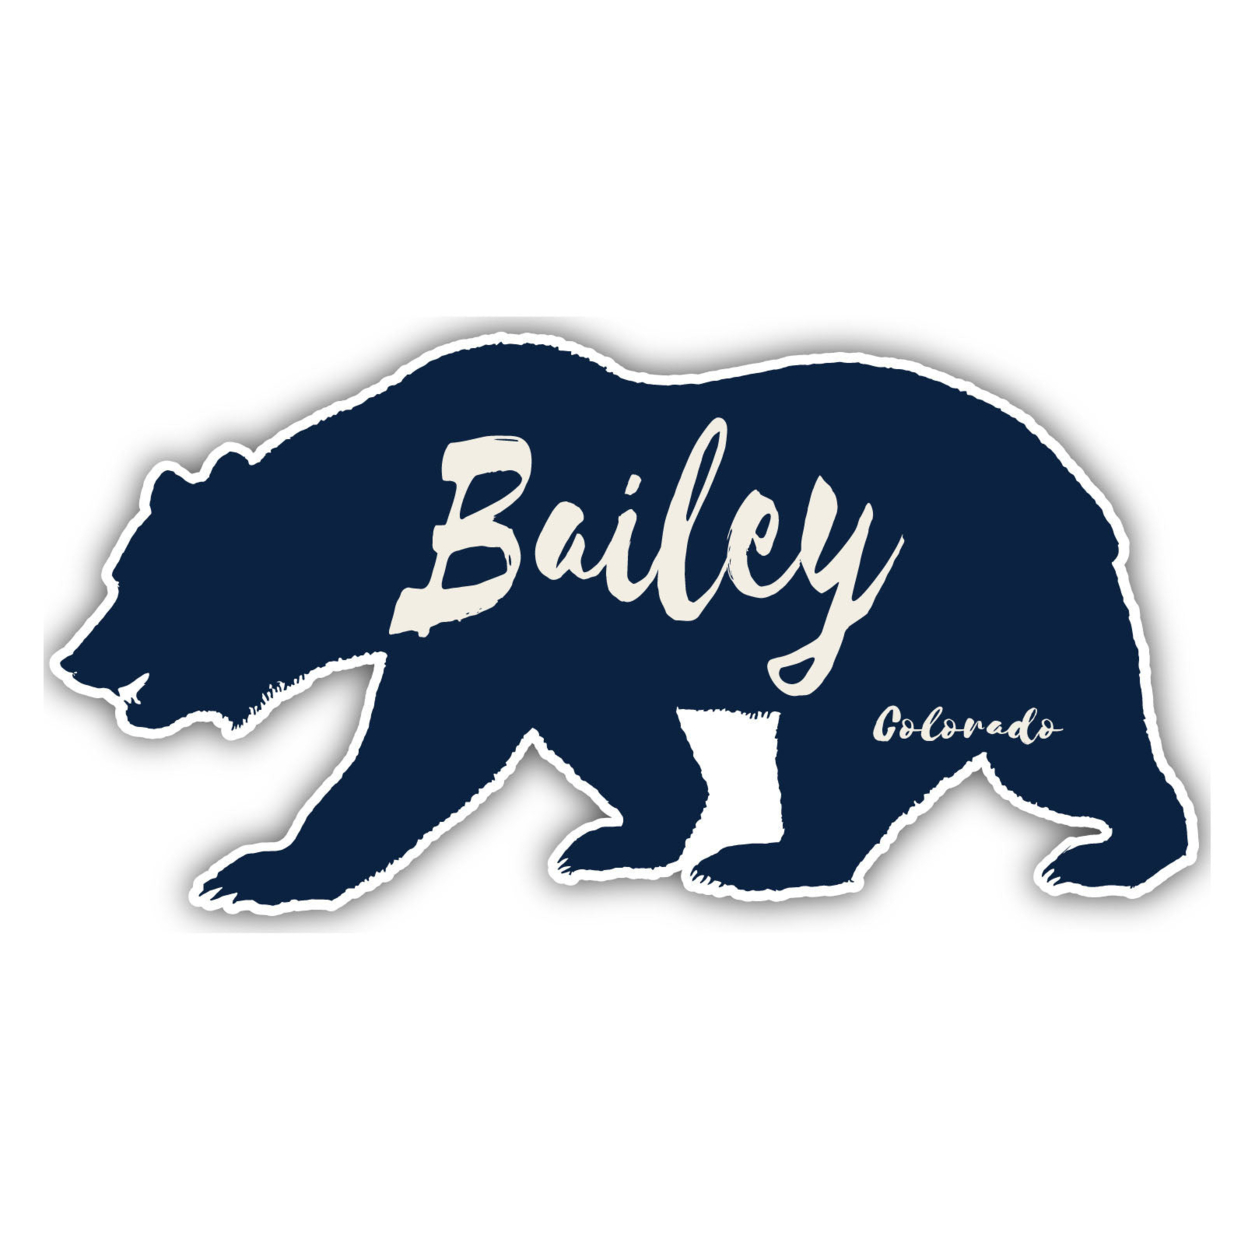 Bailey Colorado Souvenir Decorative Stickers (Choose Theme And Size) - 4-Pack, 6-Inch, Bear